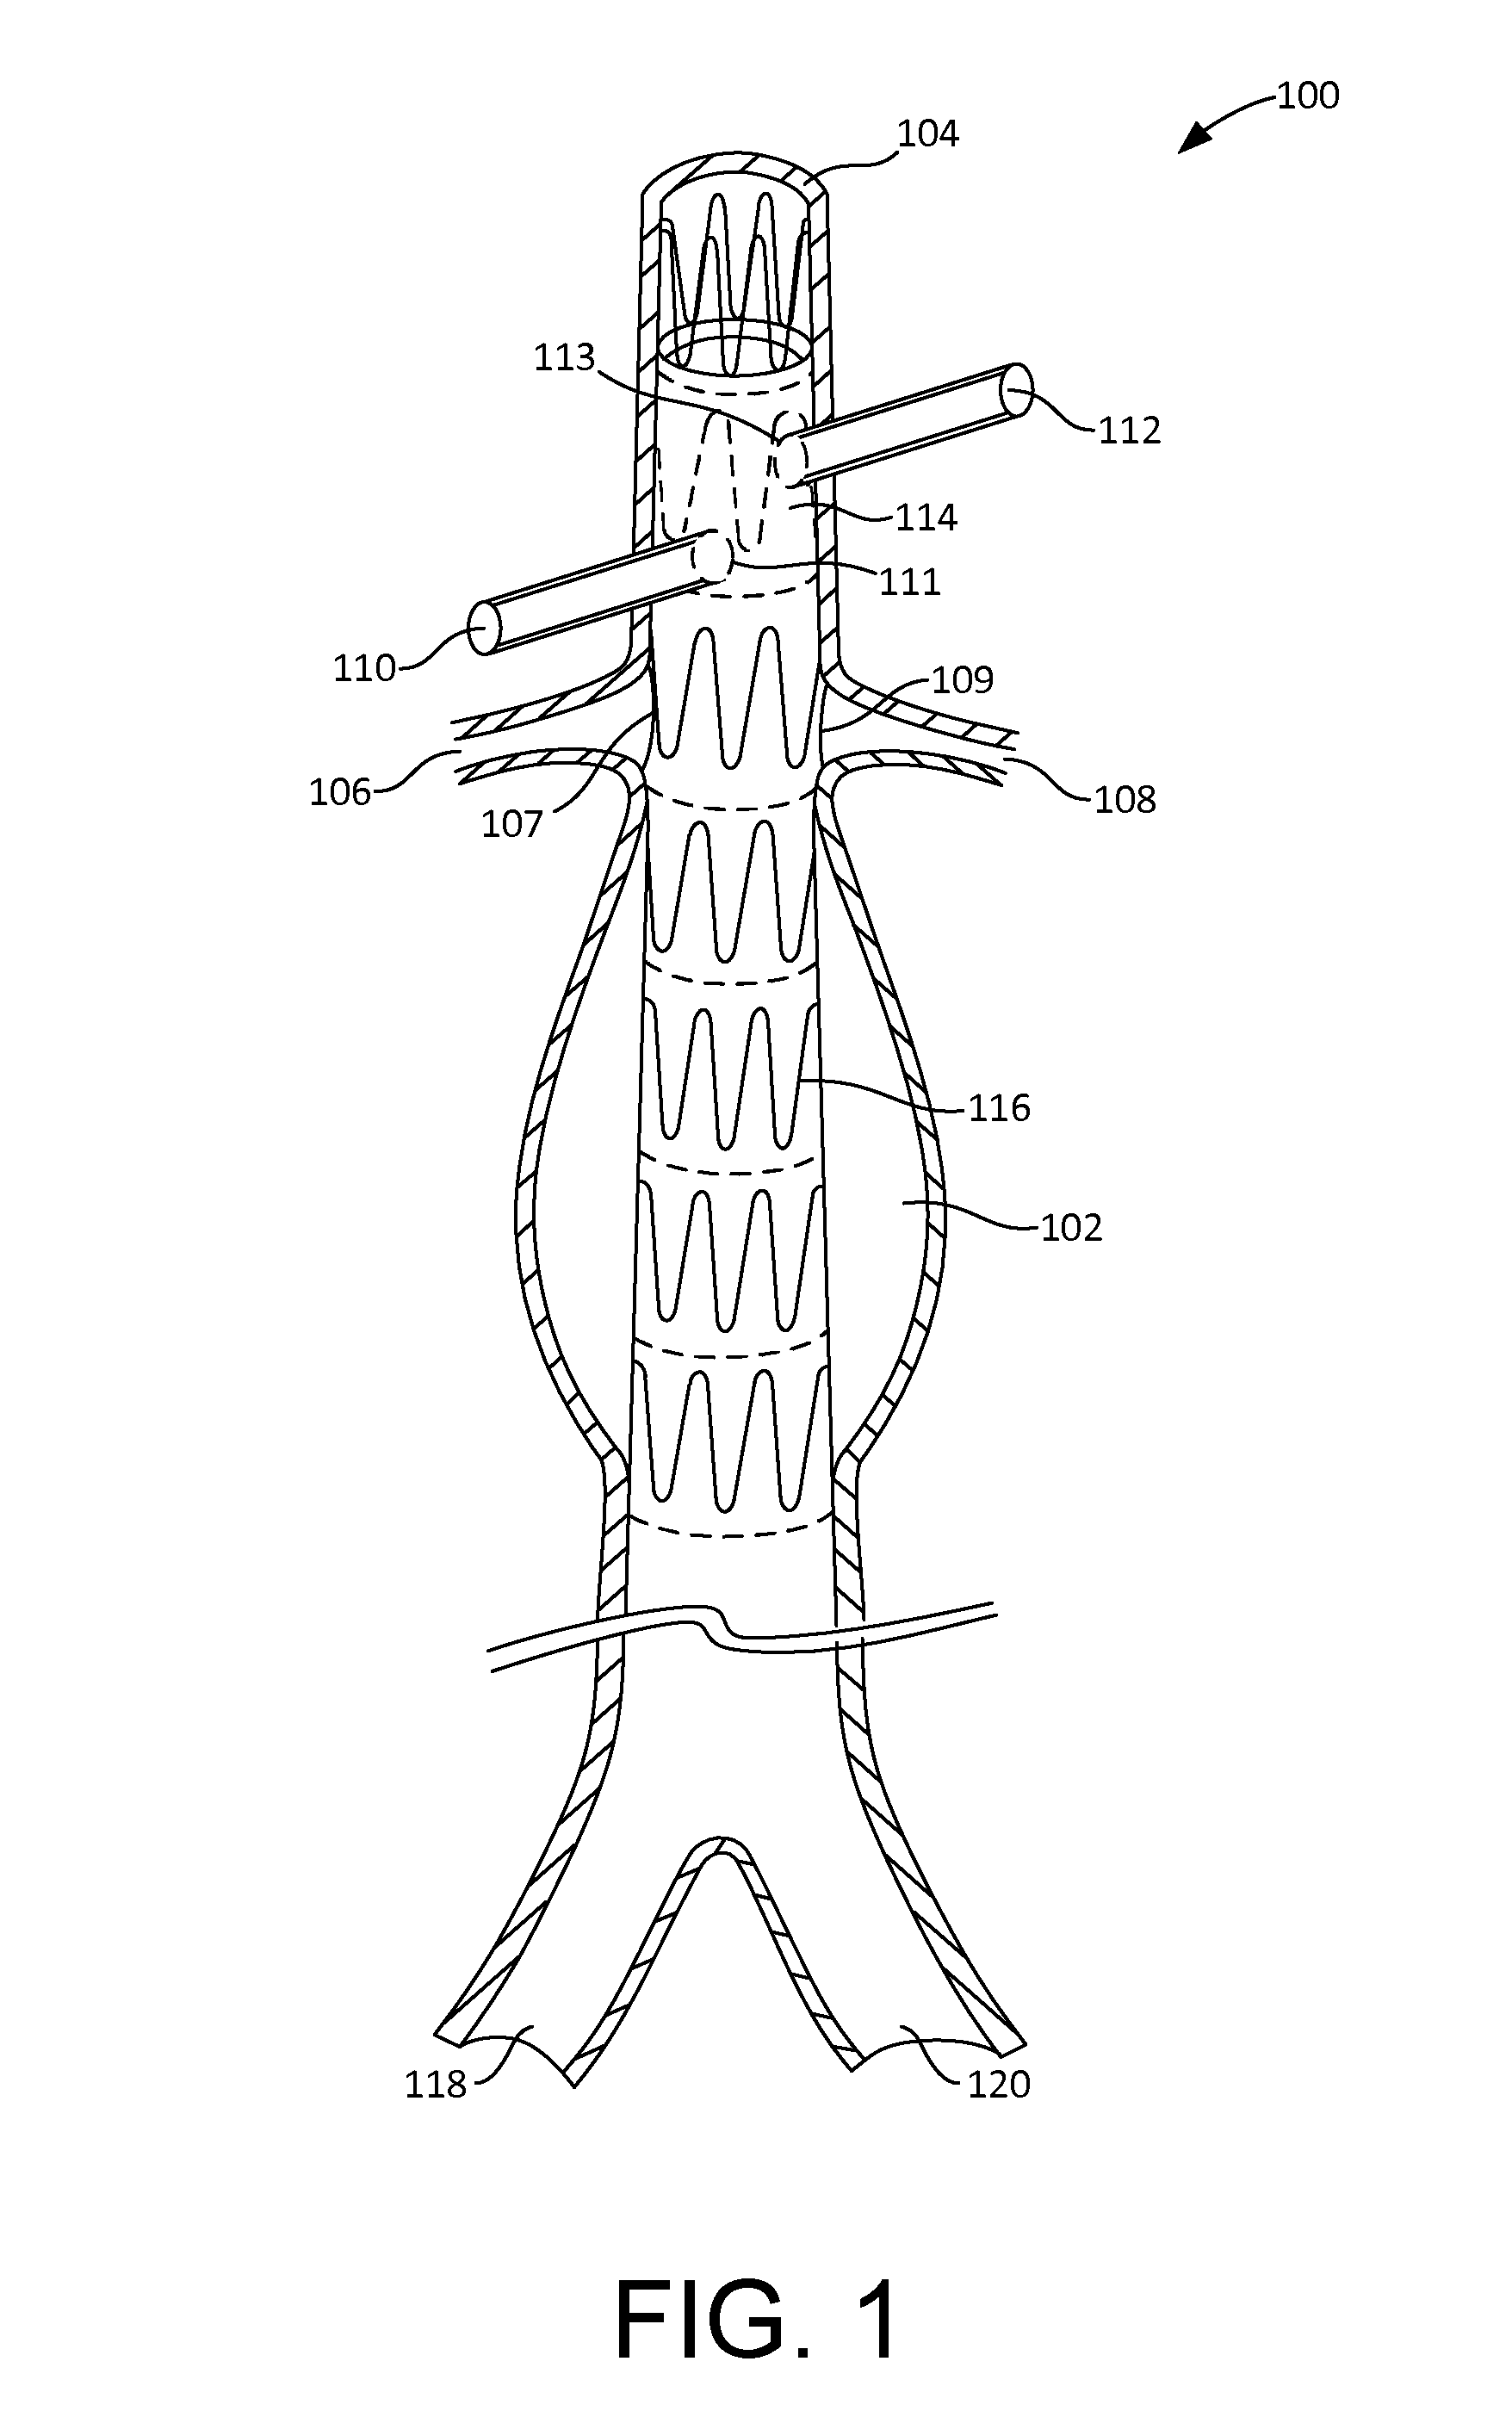 Fenestration template for endovascular repair of aortic aneurysms